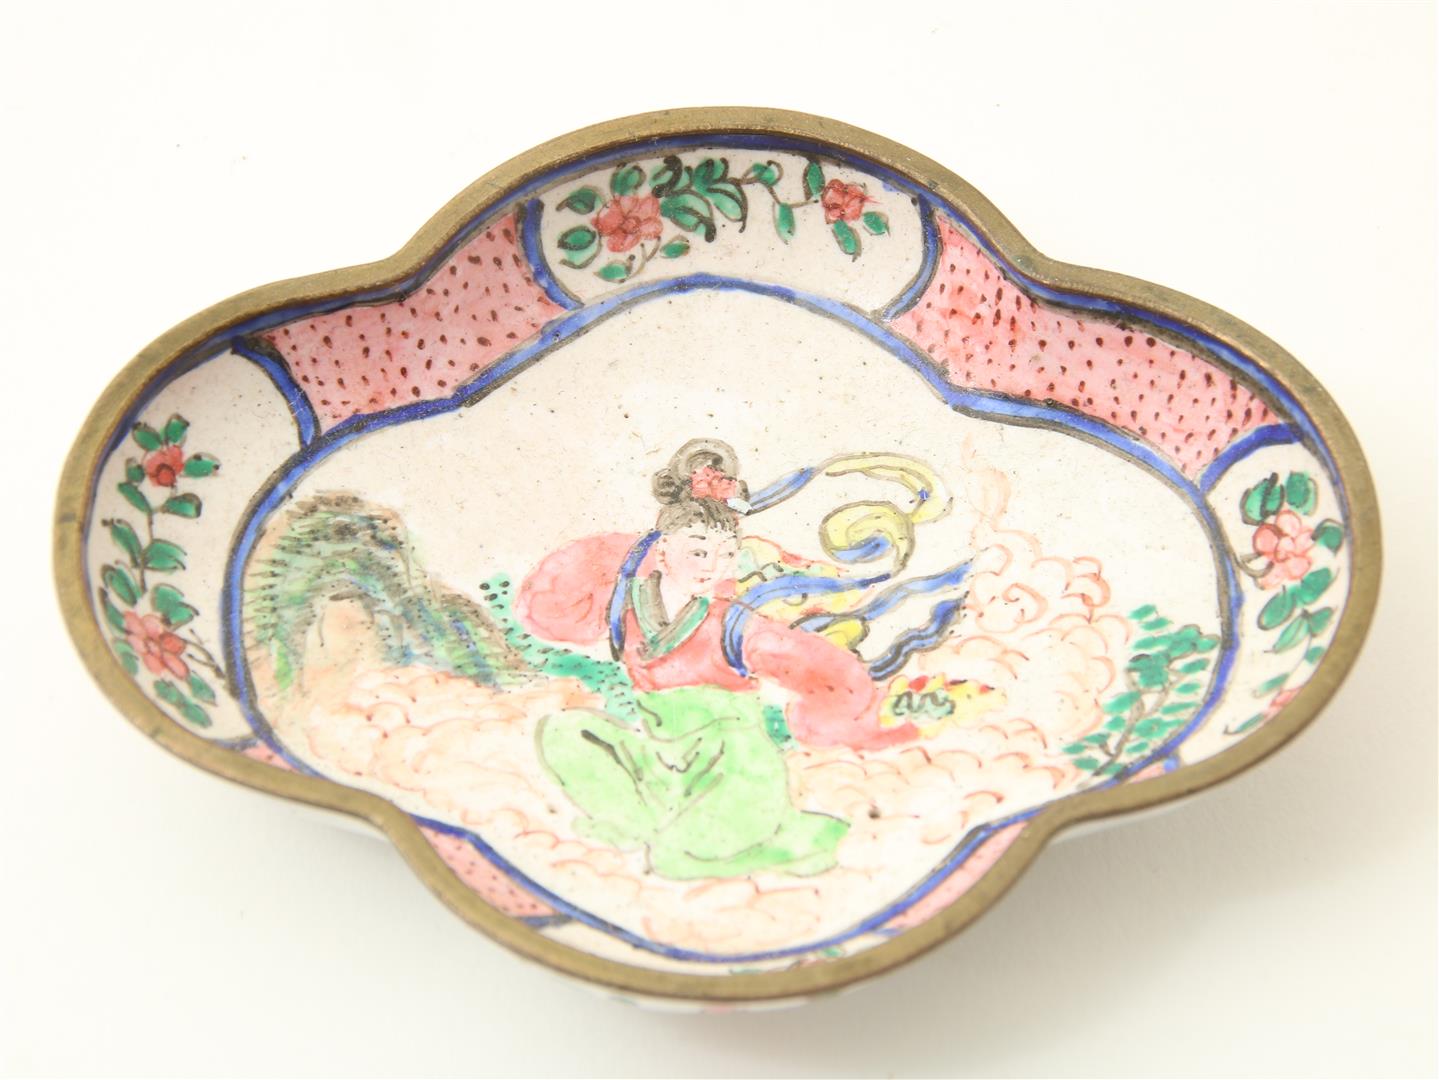 Series of 2 Canton enamel quatrefoil dishes in clover shape with decor of a lady in landscape, - Image 2 of 4